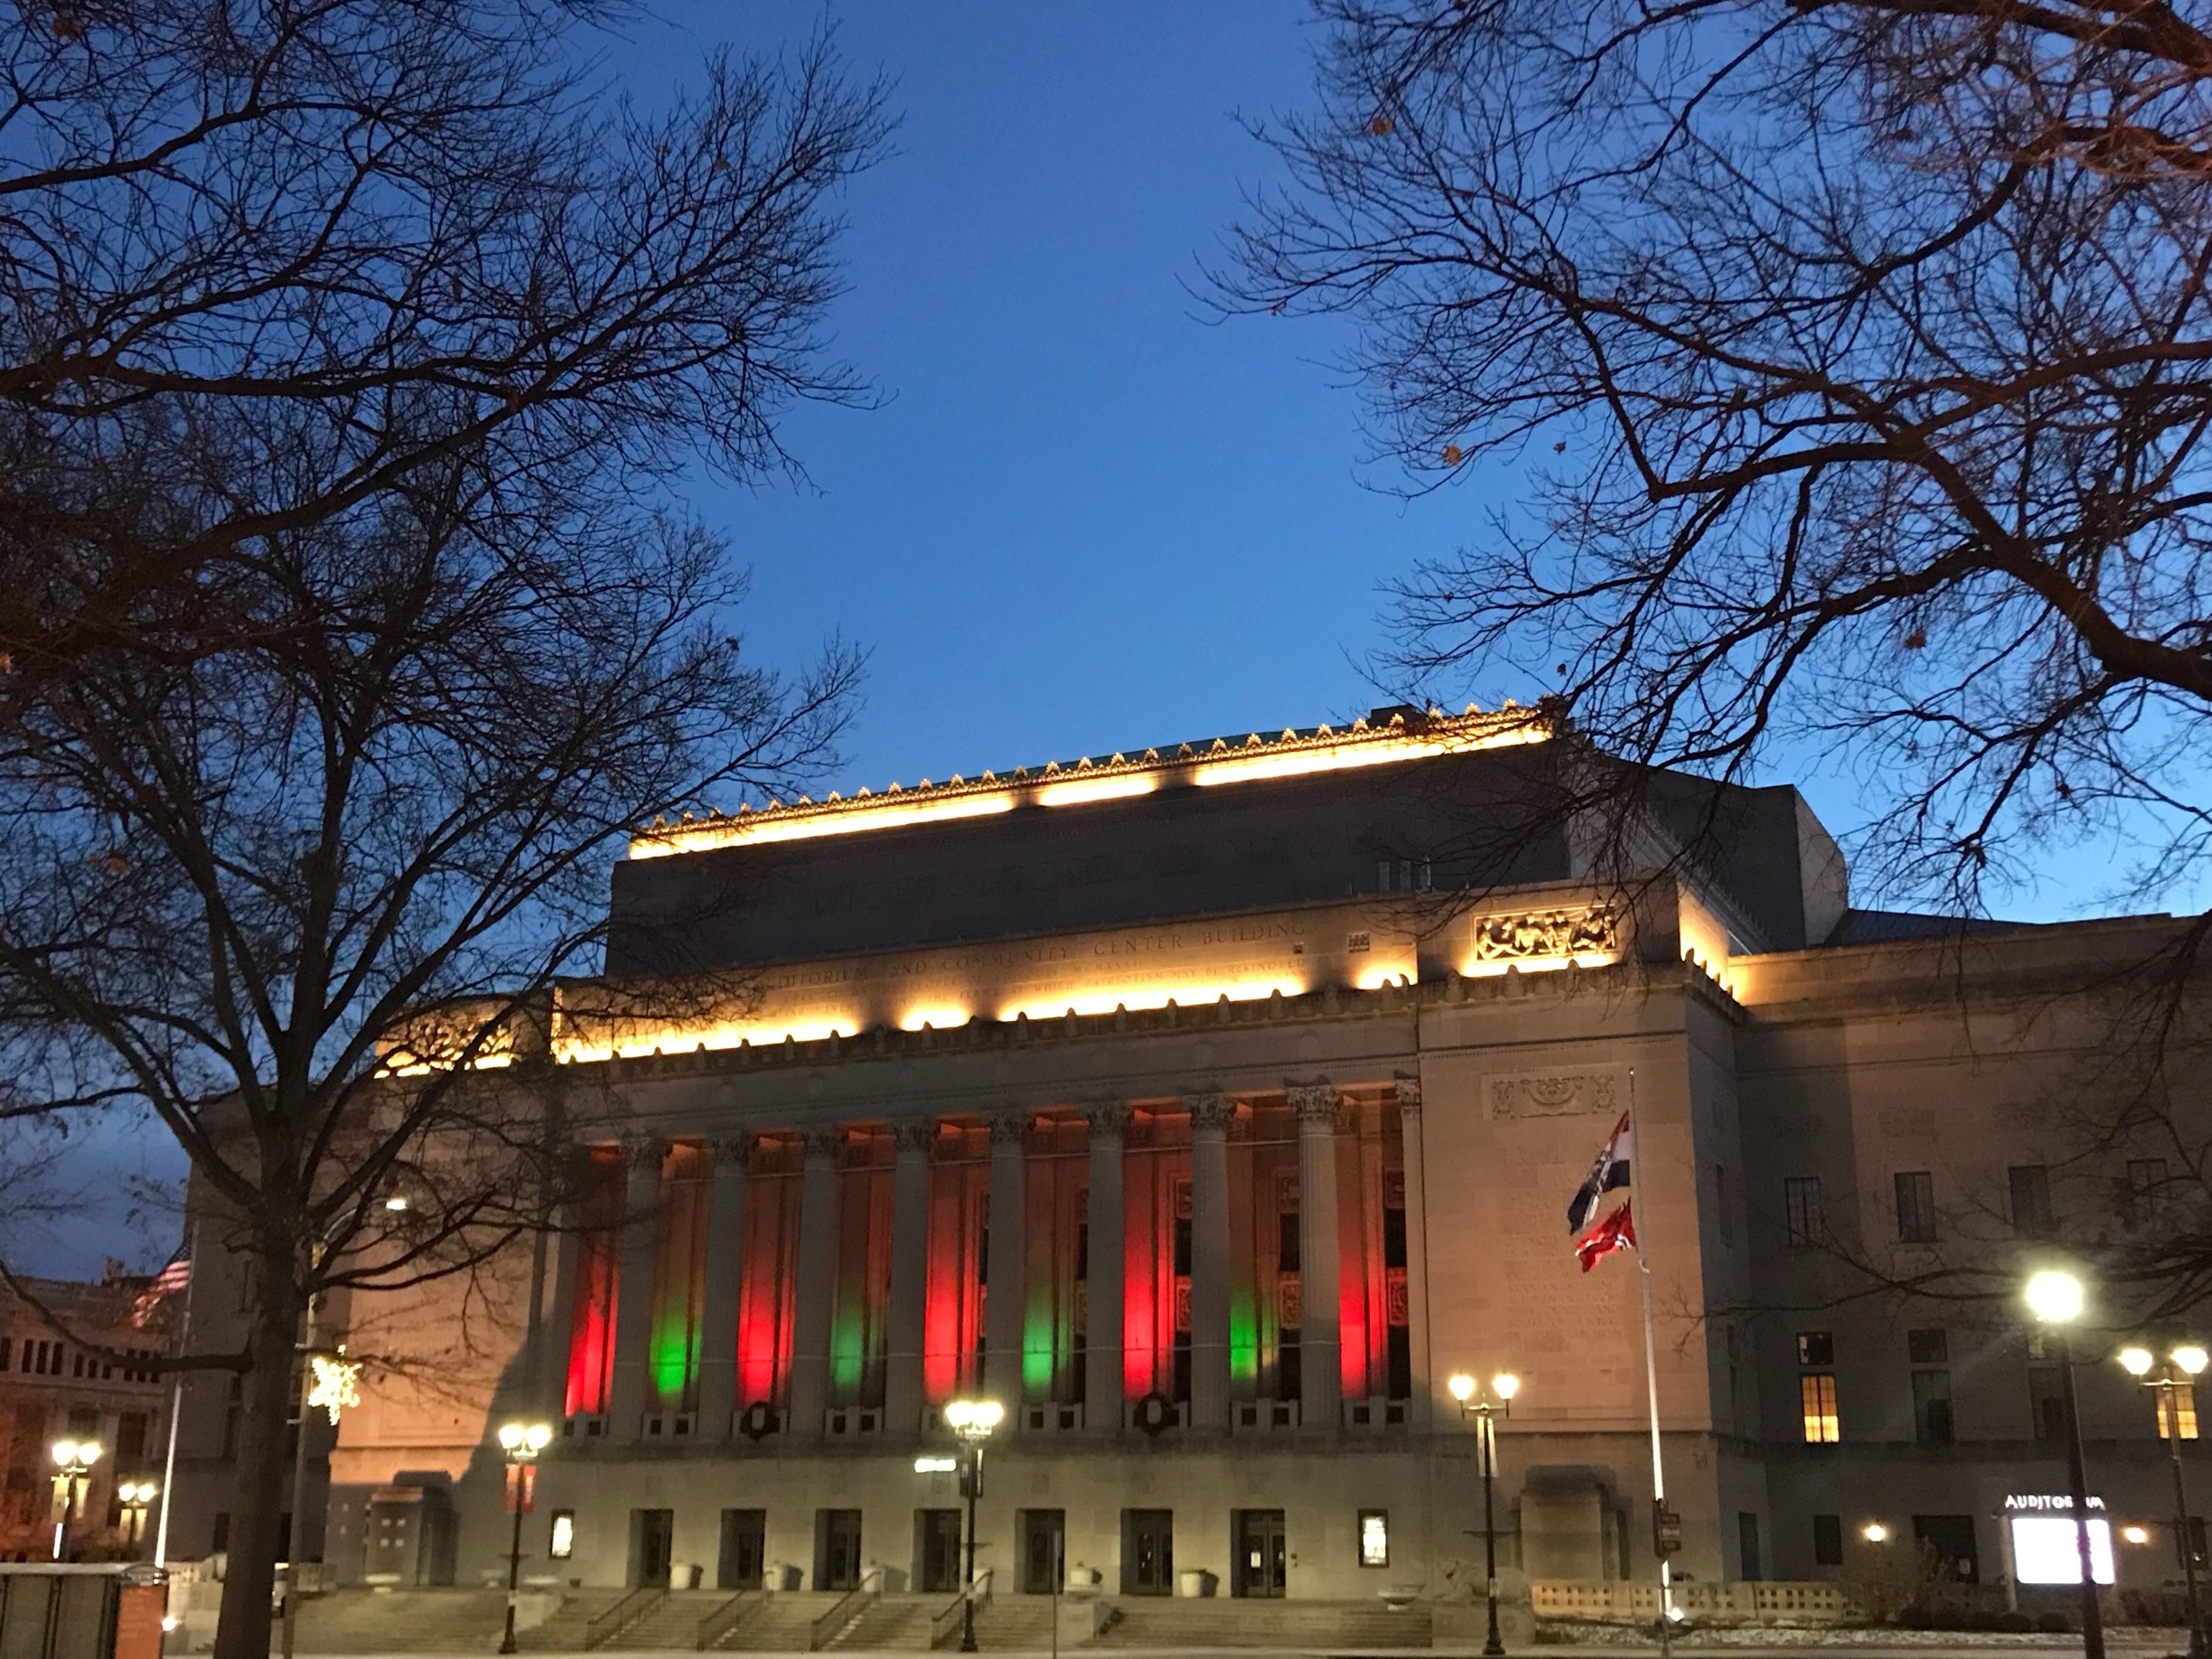 The Peabody Opera House sporting its holiday colors! #holidays #citylife #architecture #red #green #tourism #vacation #nightlife #nighttime #saintlouis #missouri #downtown #winter #holiday #reflection